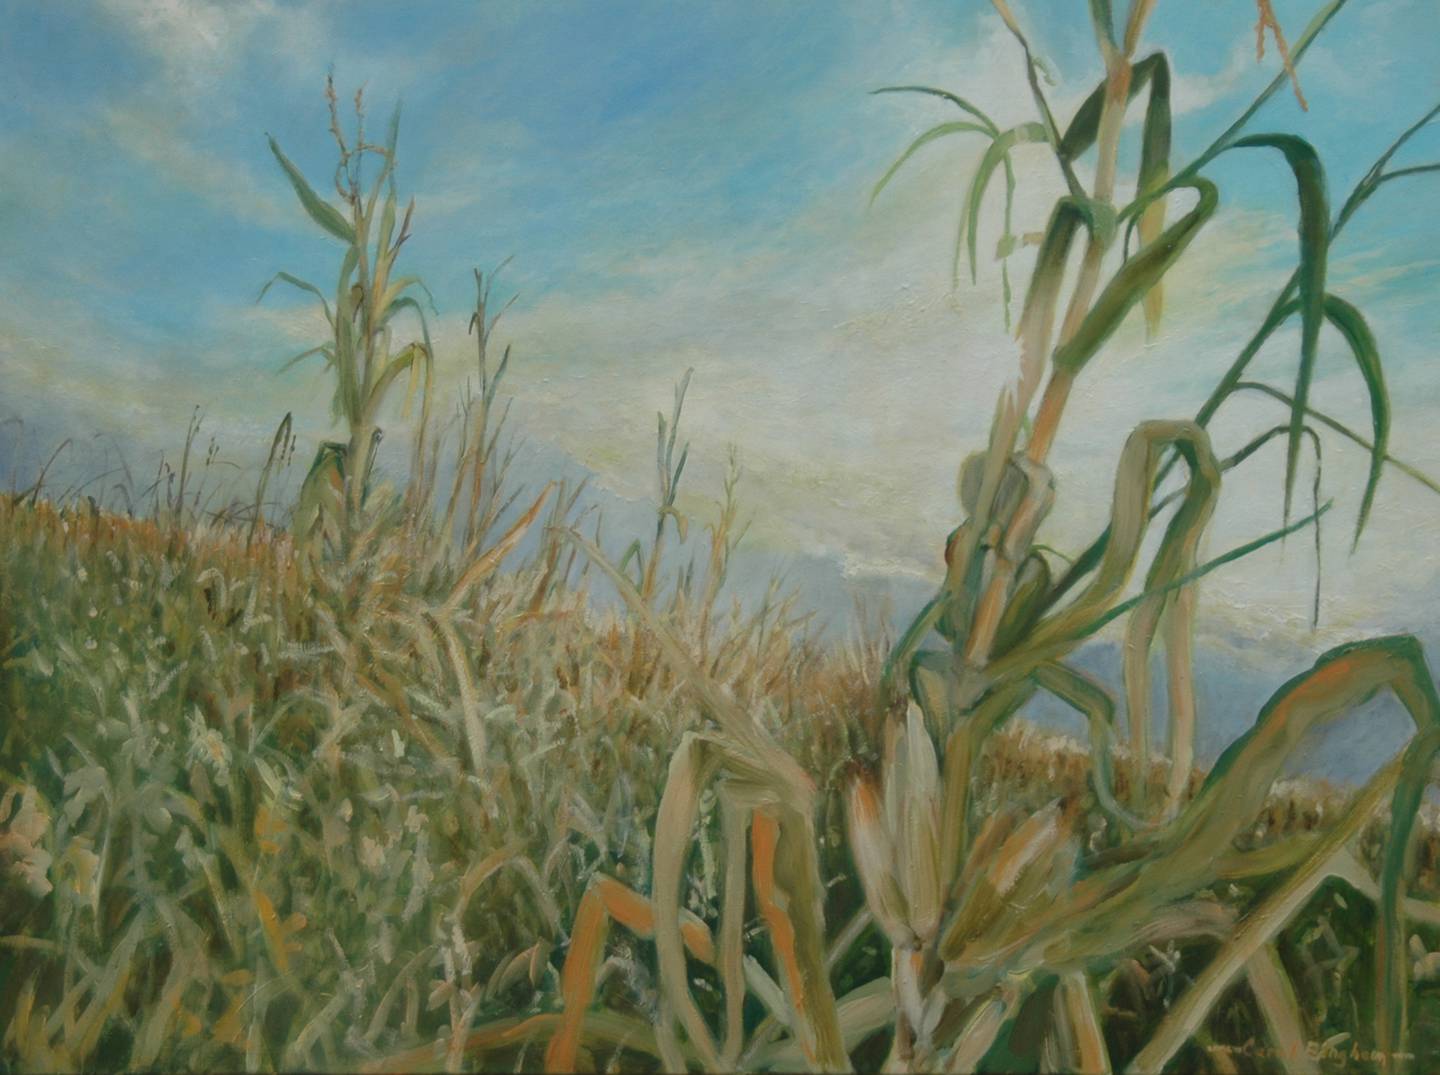 “Due East,” an oil painting on canvas by Carol Bingham of Sycamore, is part of the Regional Survey exhibit put on by The Next Picture Show gallery in Dixon.